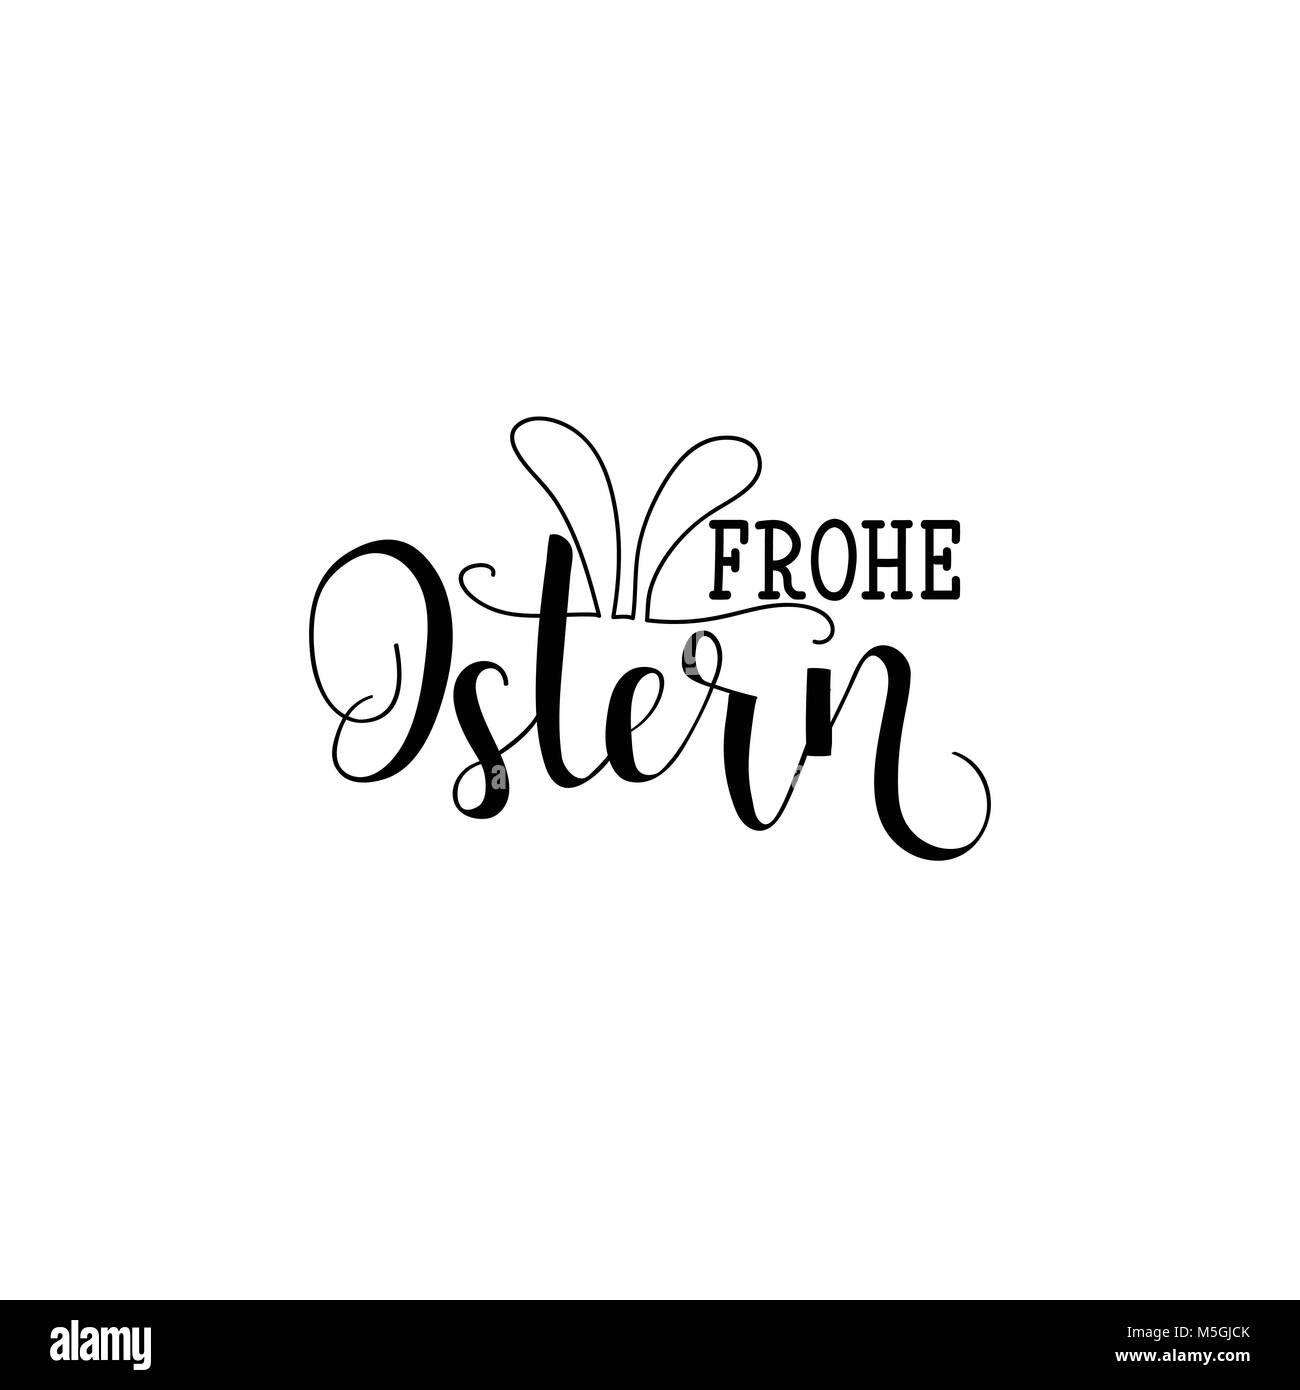 Frohe Ostern Lettering Translation From German Happy Easter Quote To Design Greeting Card